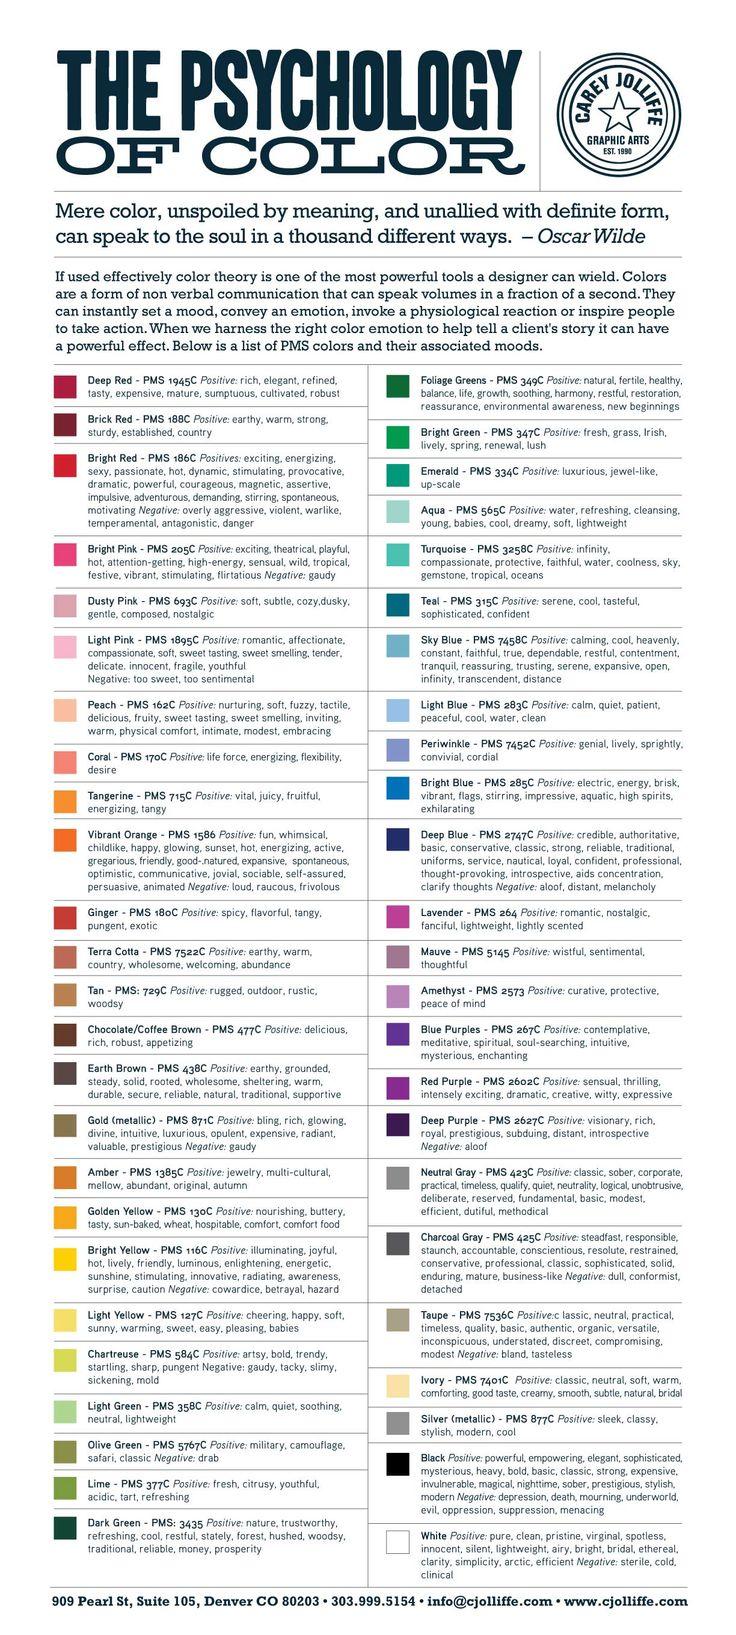 Wedding - The Psychology Of Colour